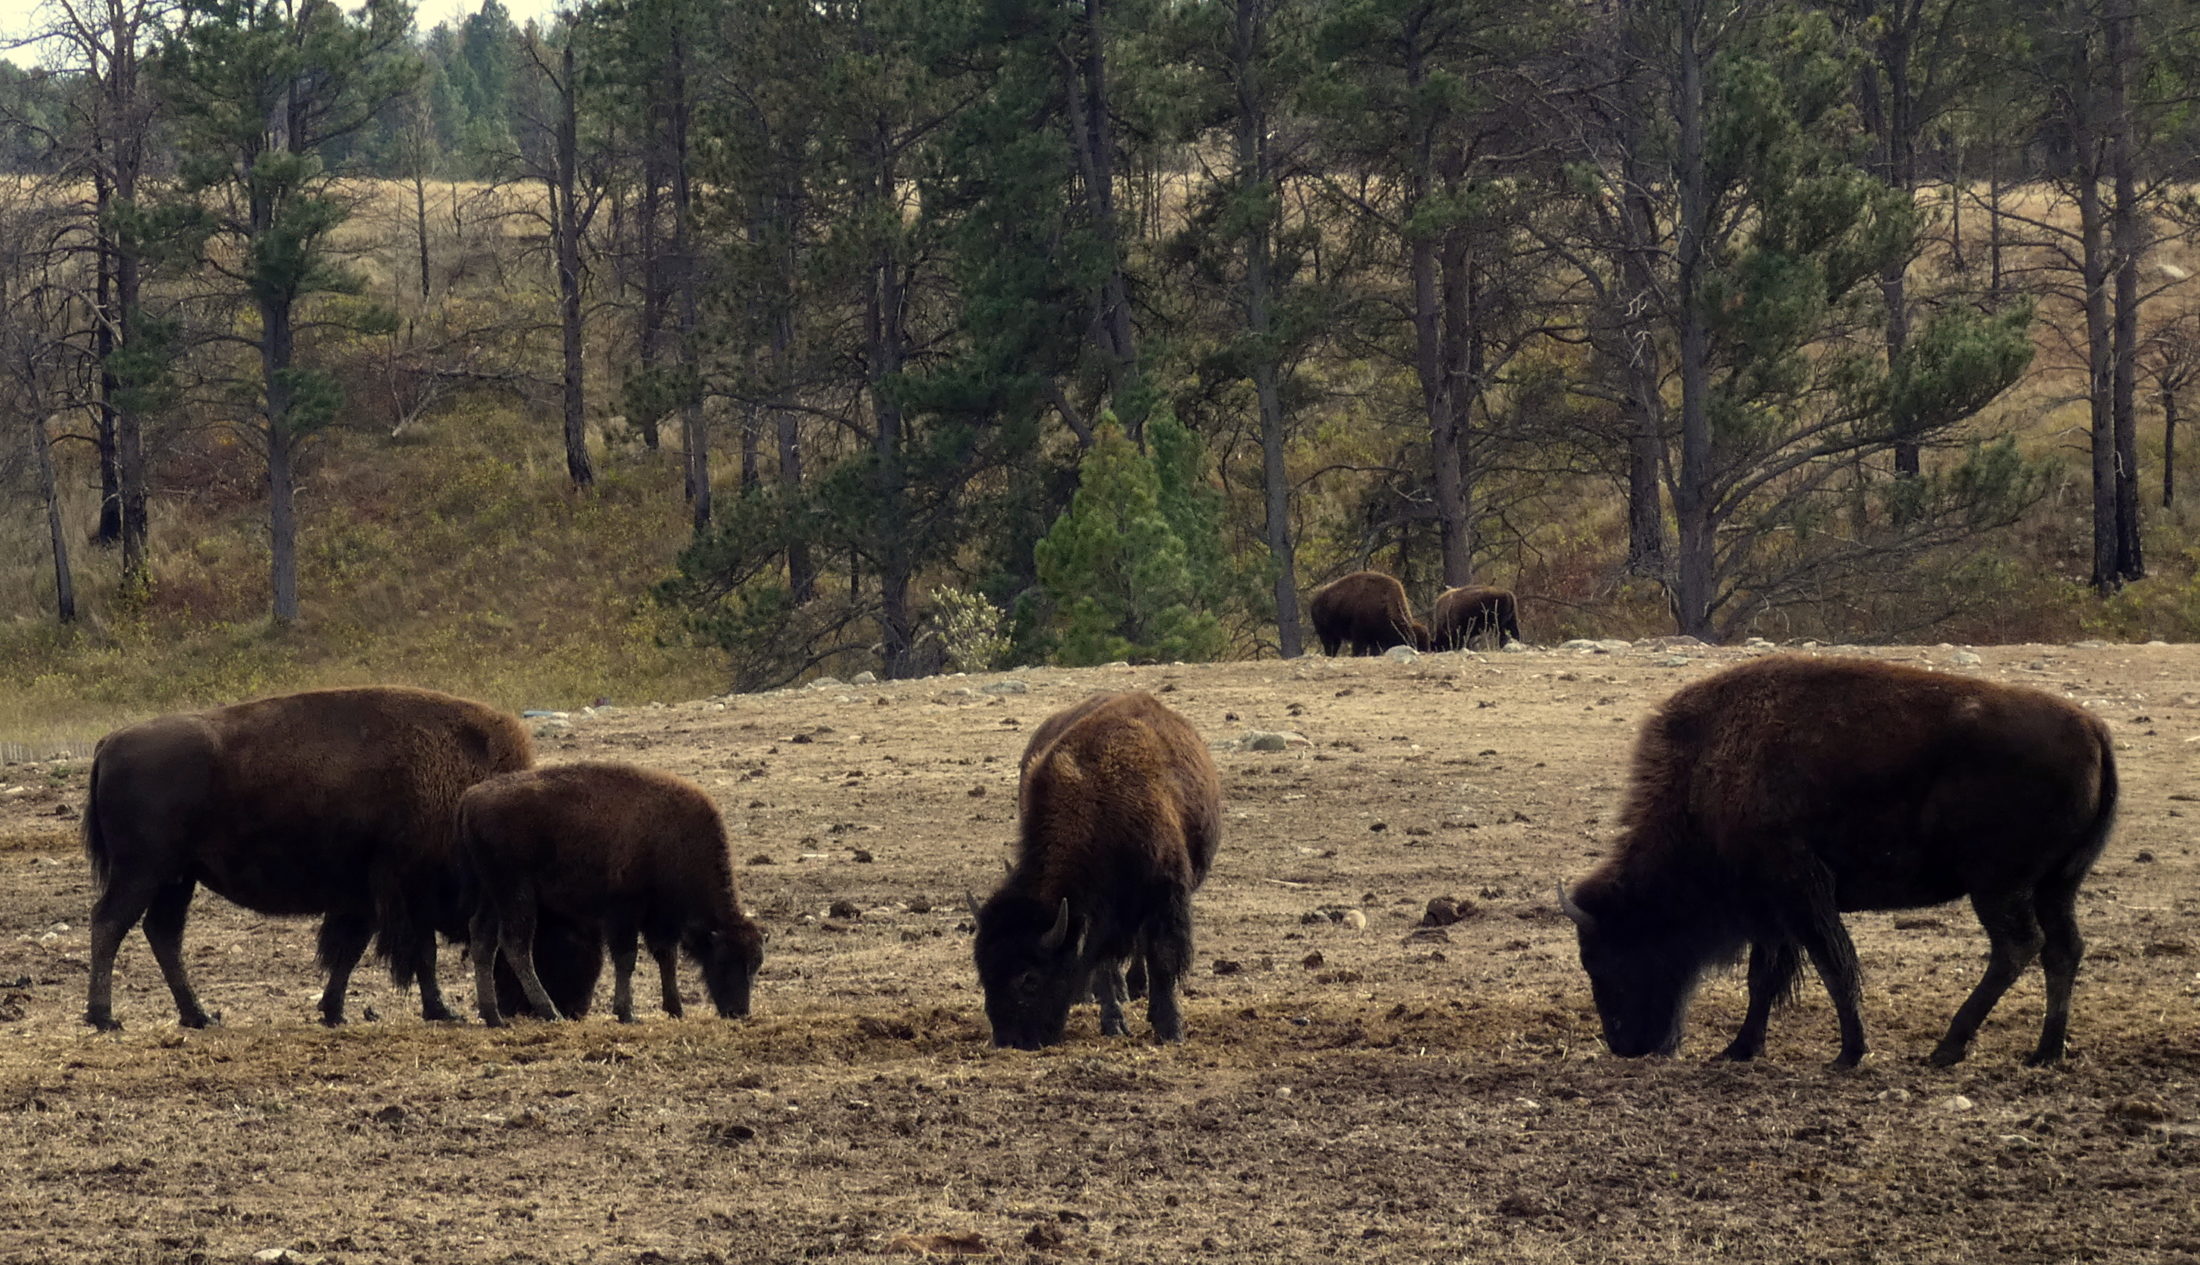 5 bison graze in a rocky field on the edge of a pine forest